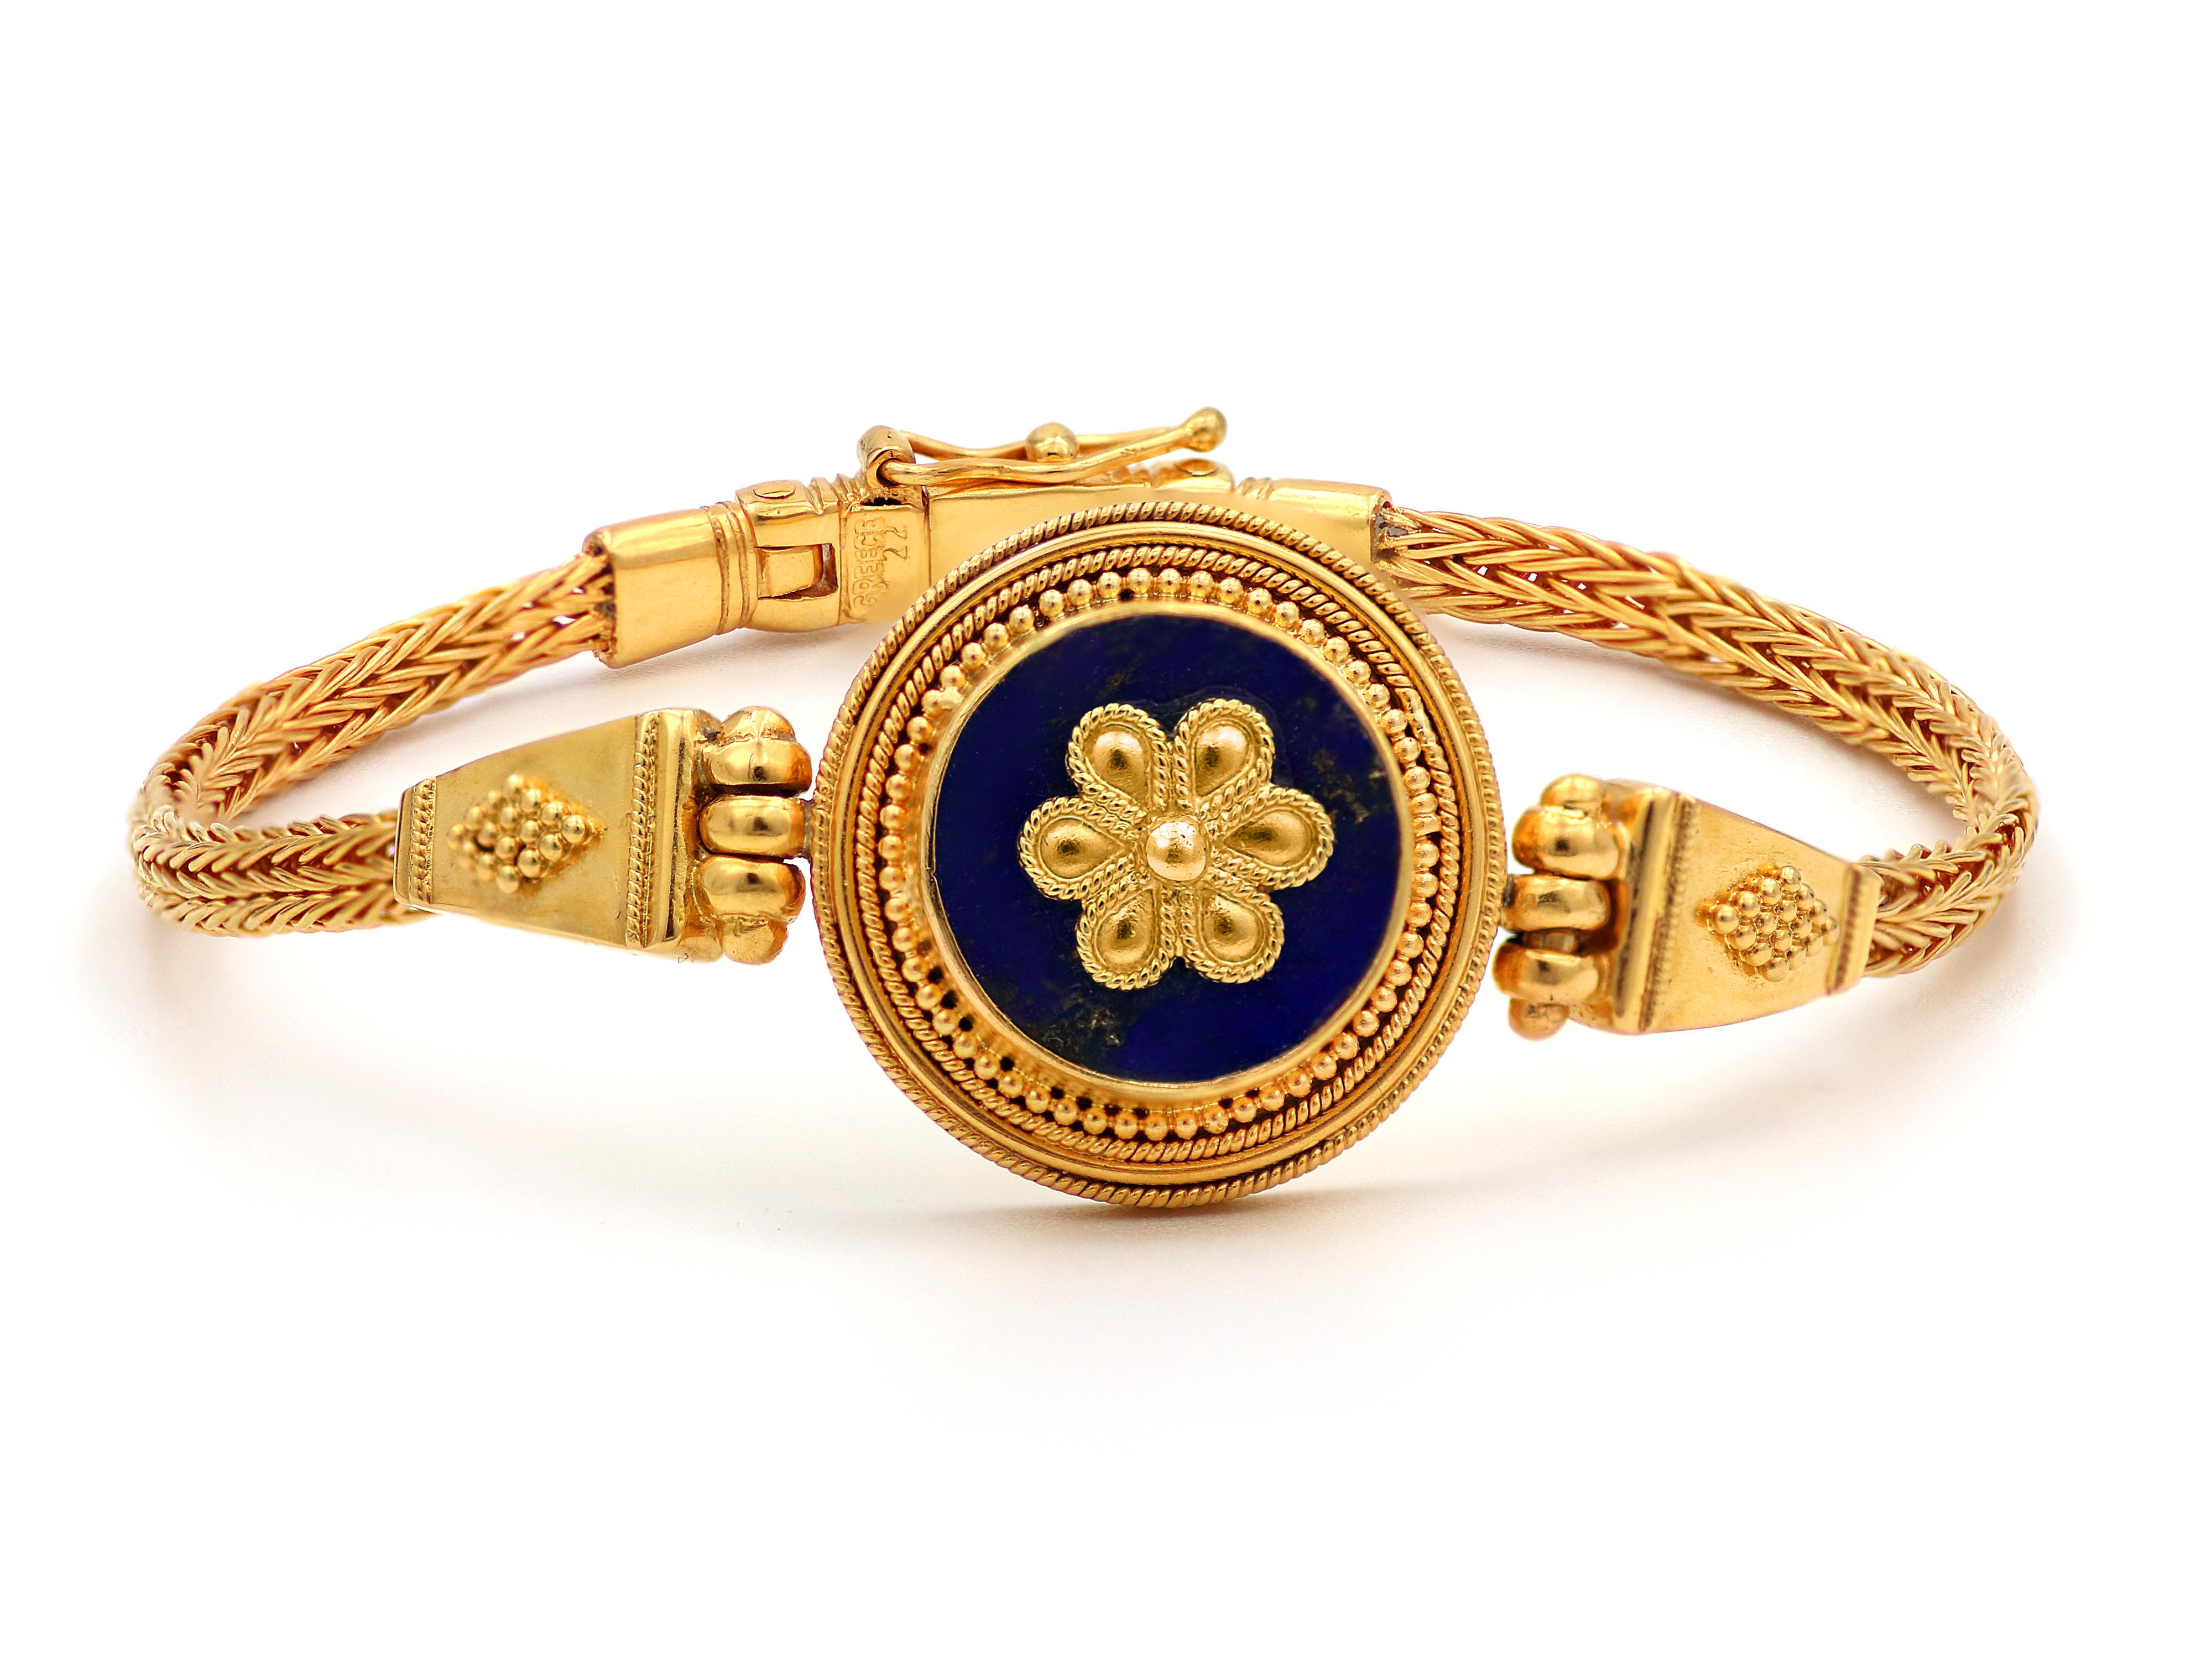 22k gold Kyklos Bracelet. This creation is so divine and perfect that we call it Kyklos, circle in En. As perfect and harmonic is a circle is exactly that design. A neoclassical era with several circles of filigree wires granulation and round Lapis